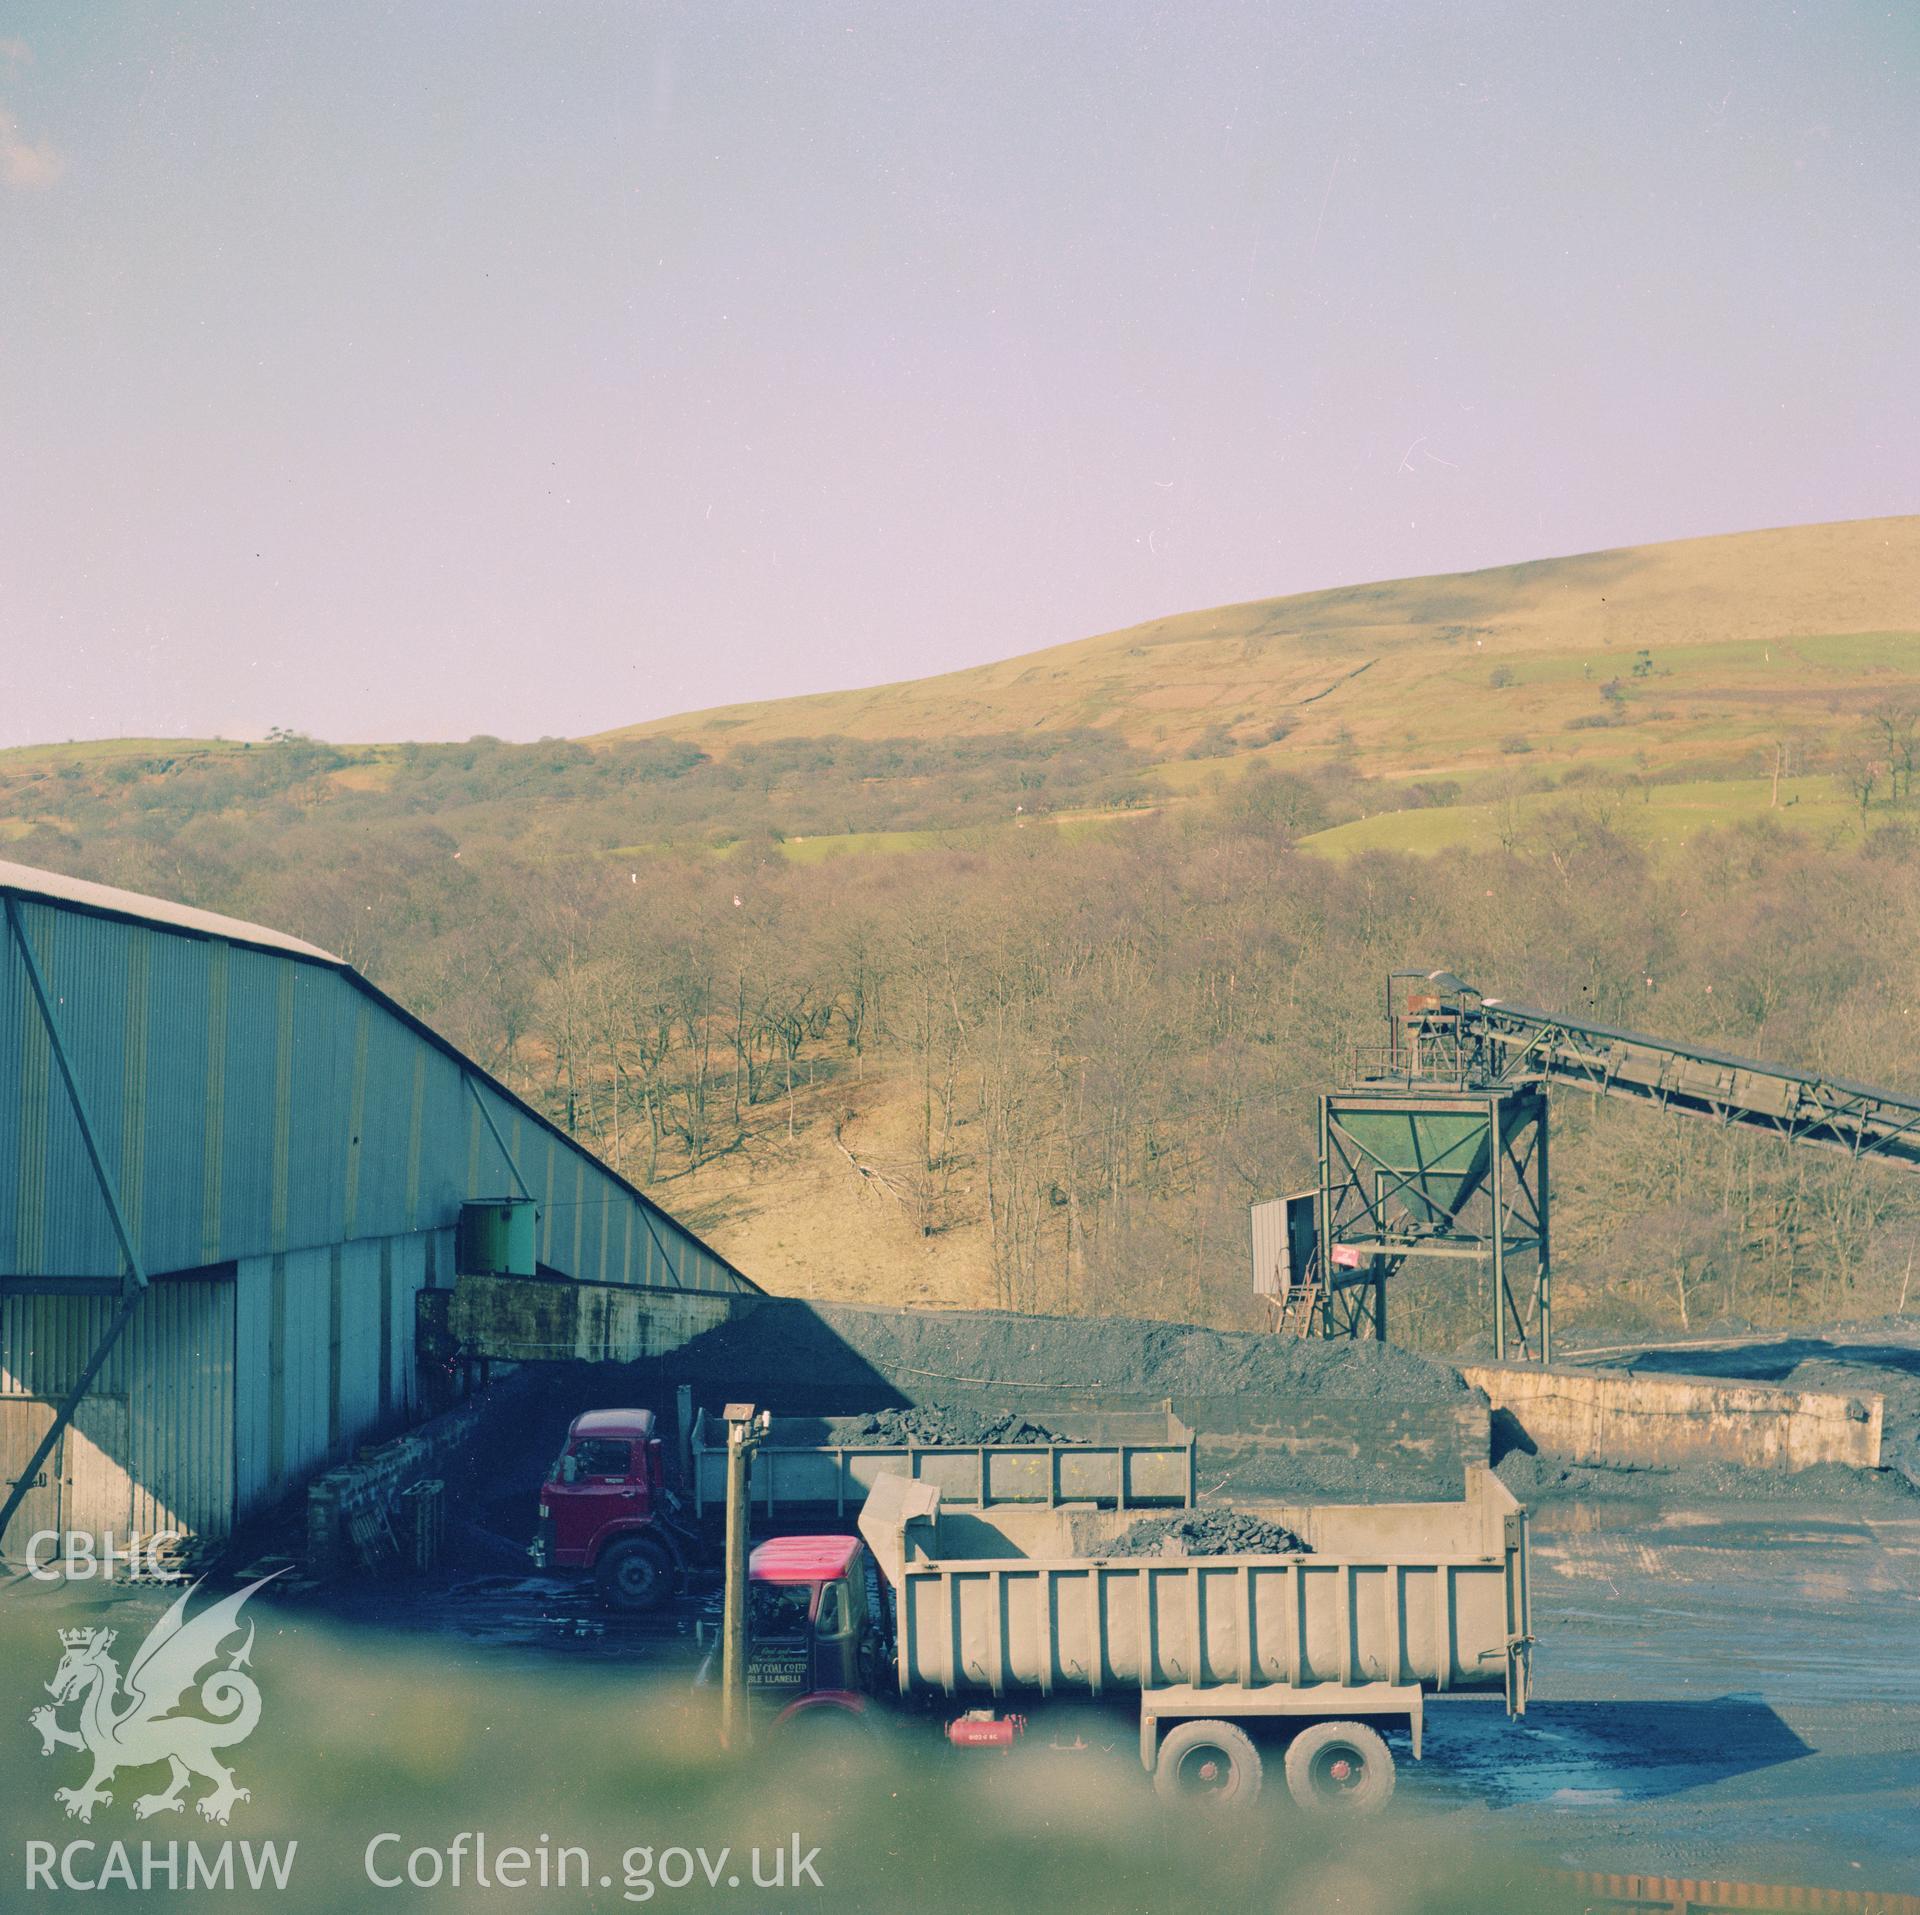 Digital copy of an acetate negative showing coal lorries at Blaenant Colliery from the John Cornwell Collection.